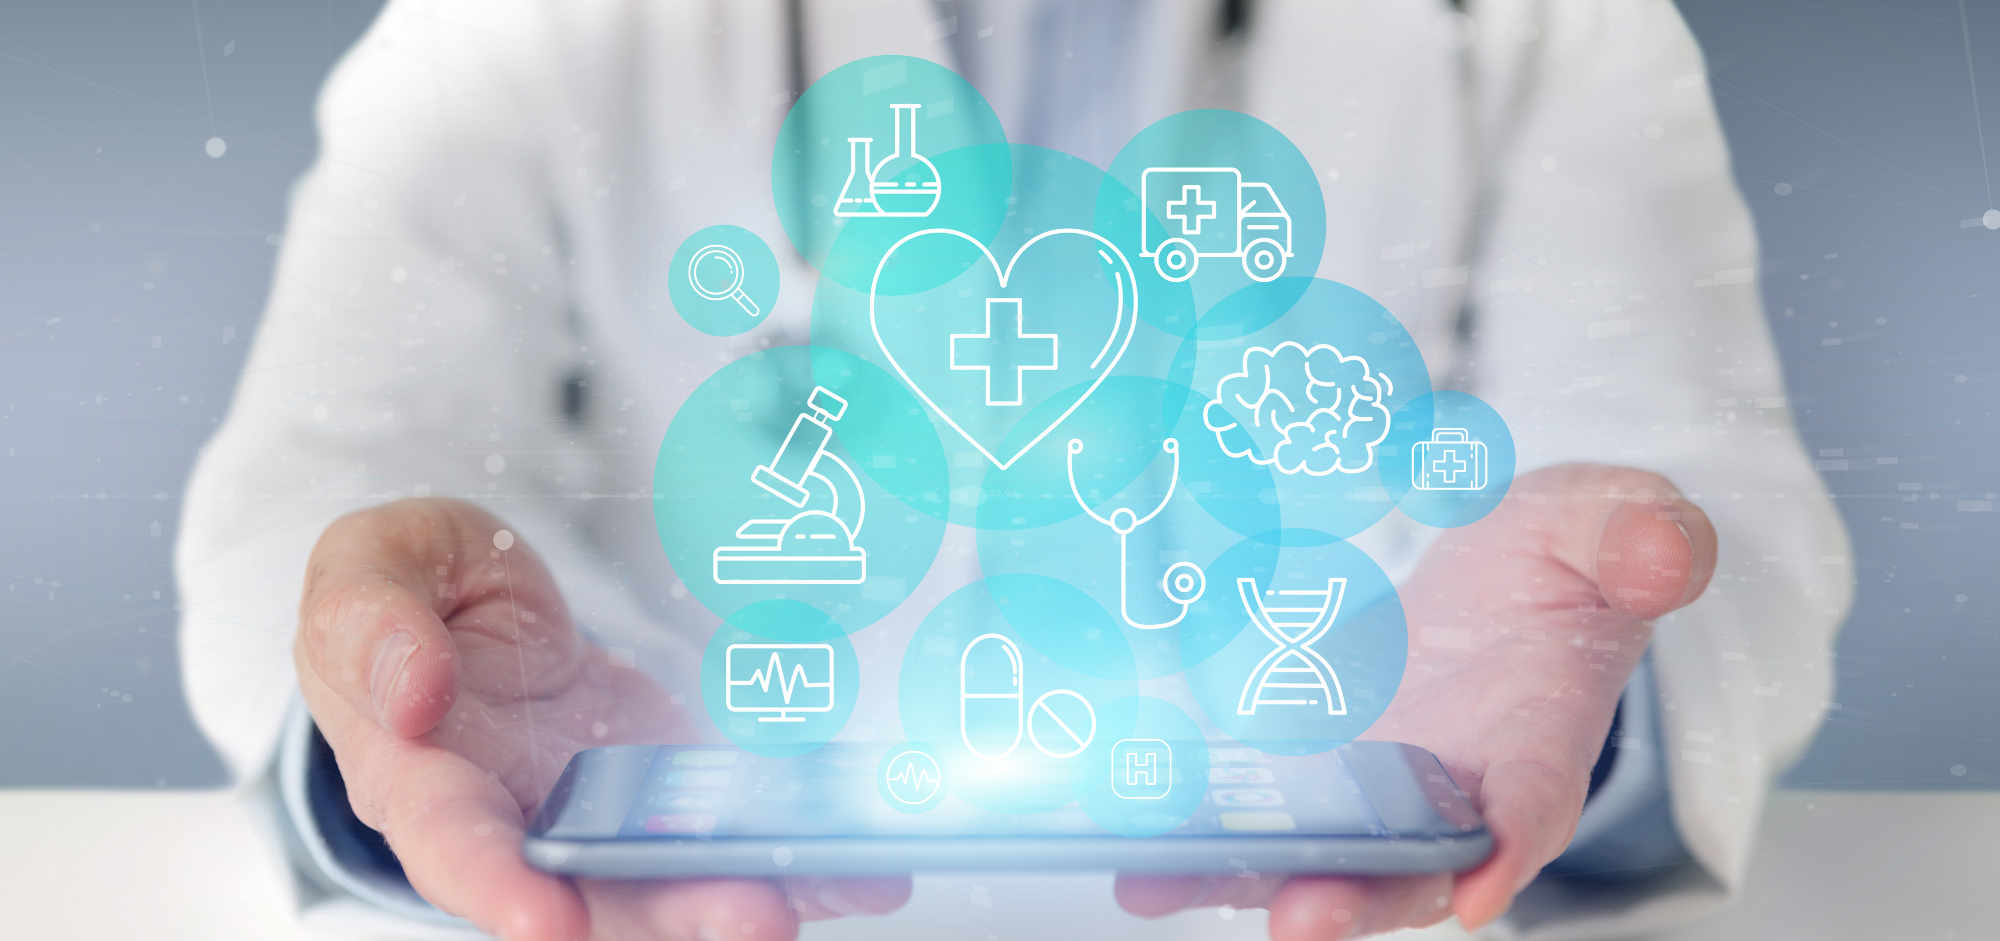 5 Must-Have Processes and Technologies for Healthcare Cybersecurity